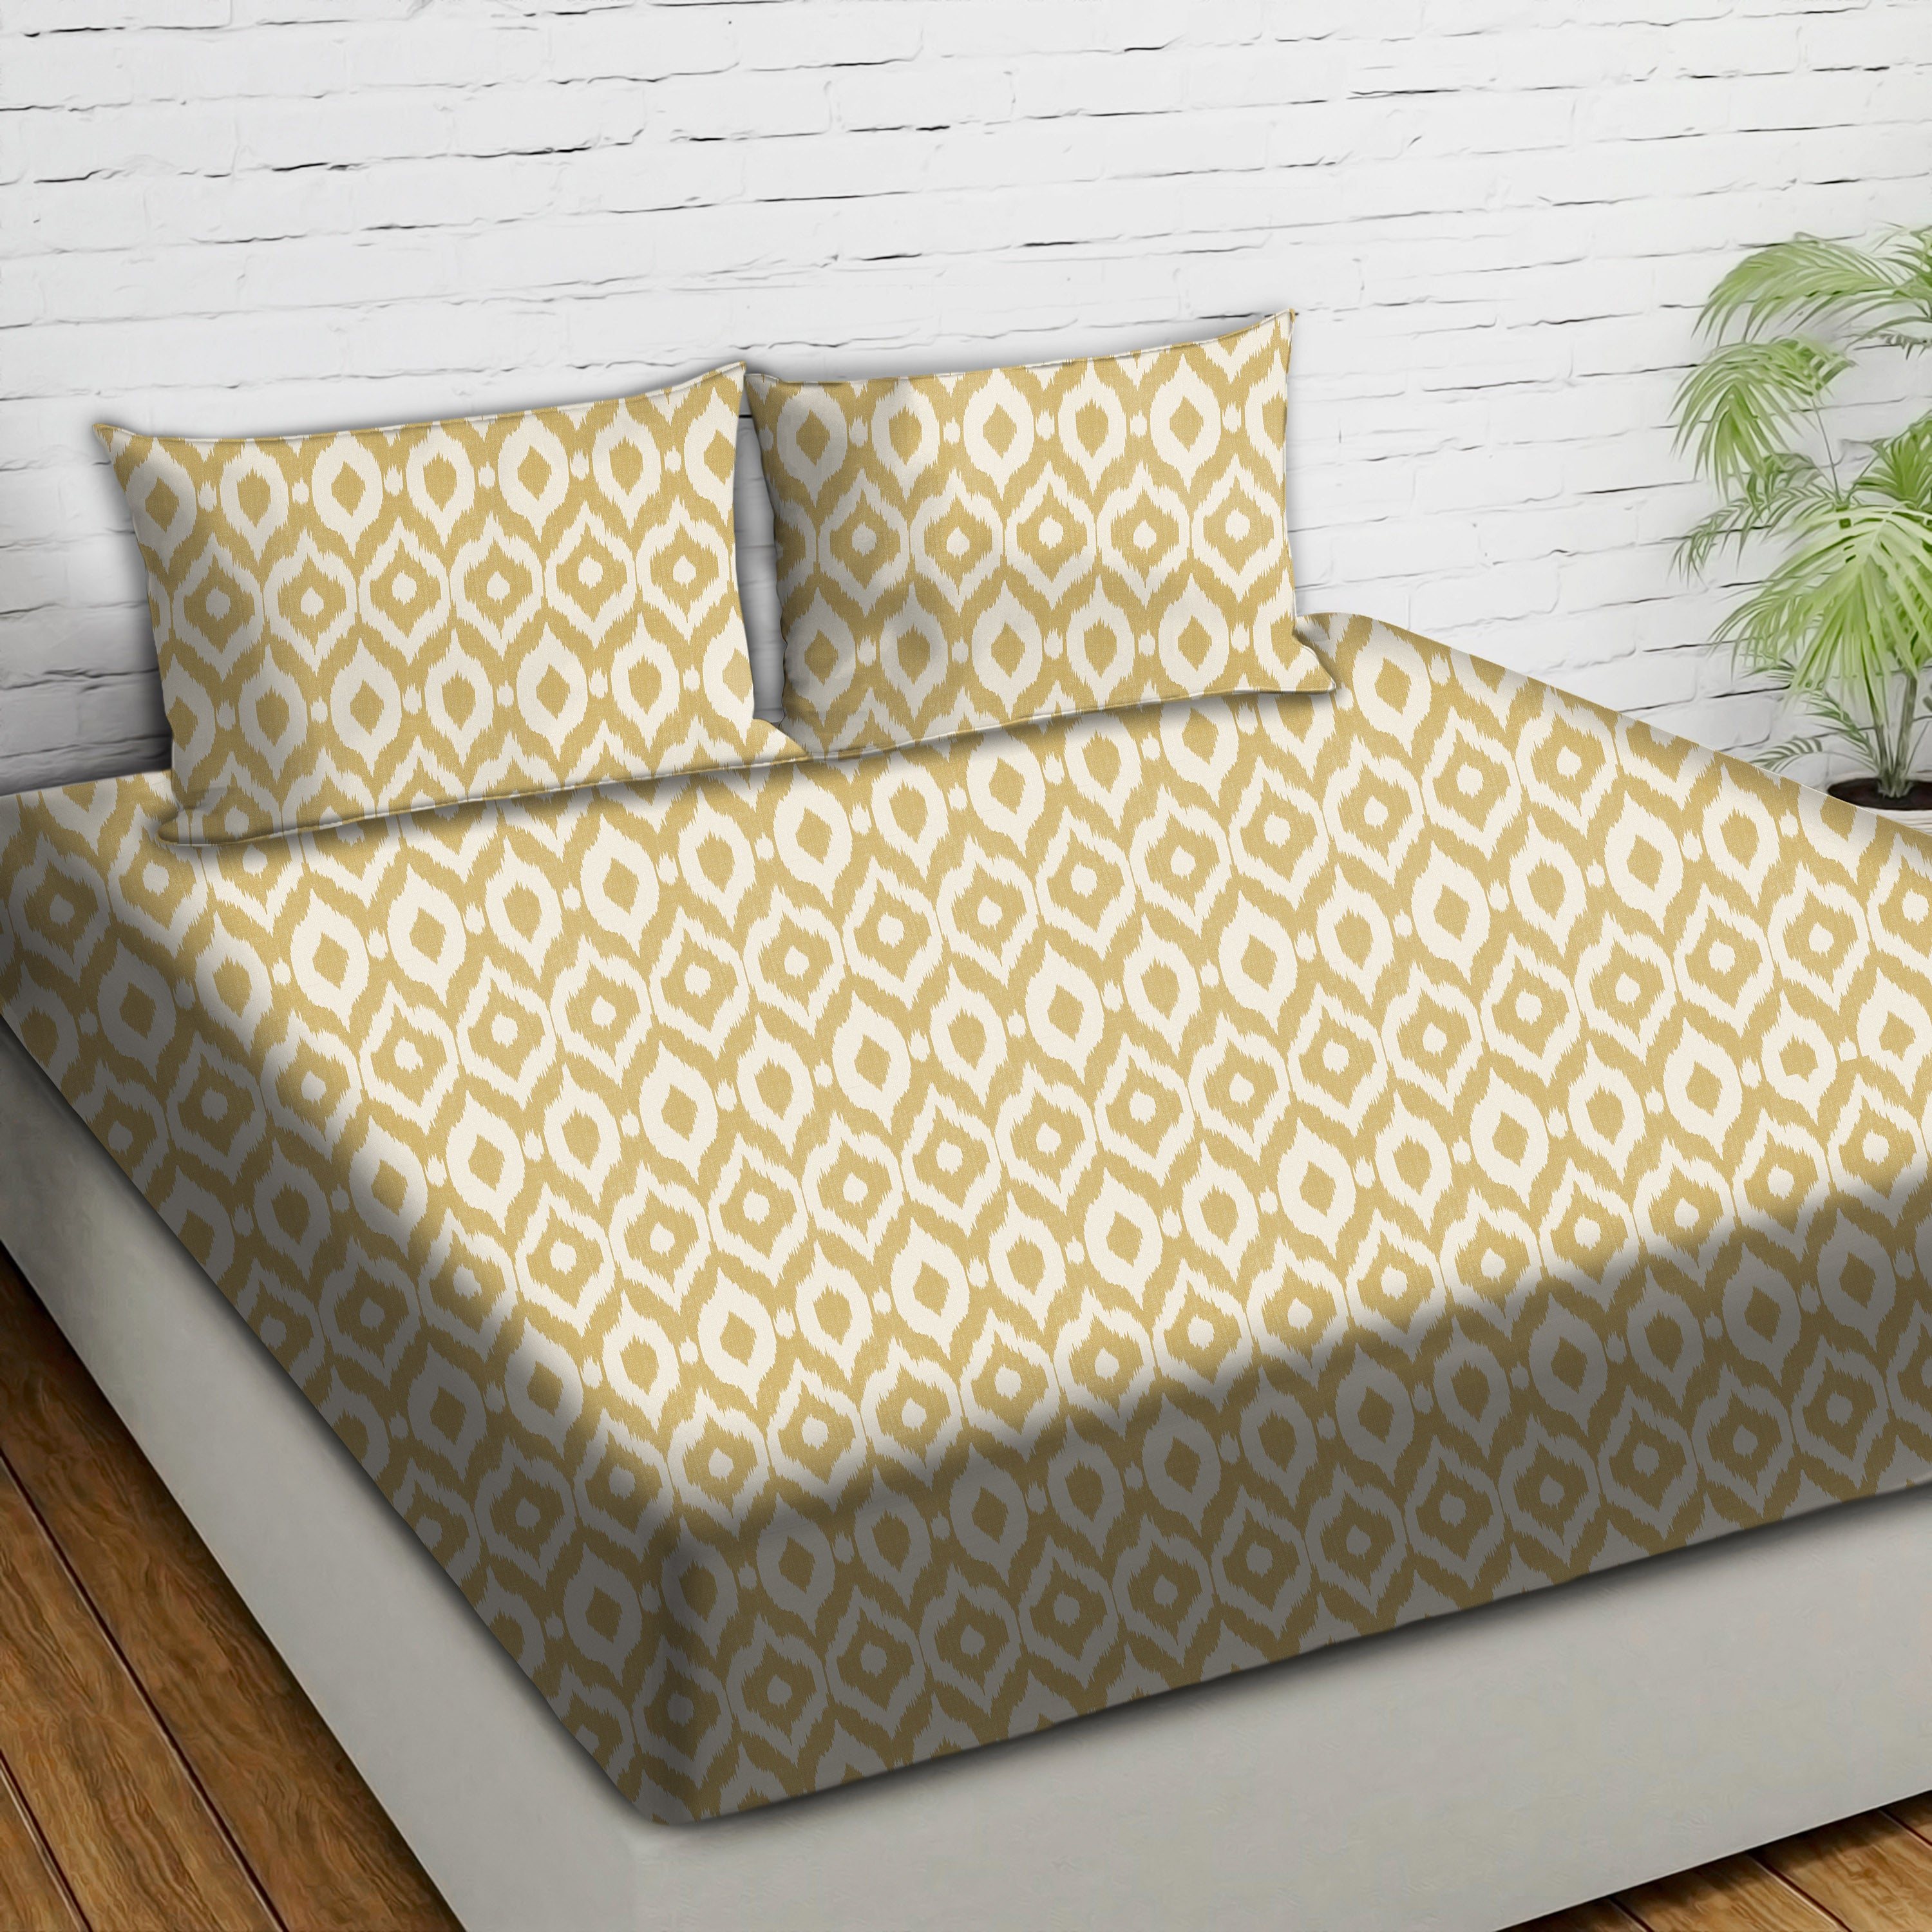 Bedcover Bistre Beige for Double Bed with 2 Pillow Covers King Size (104" X 90")